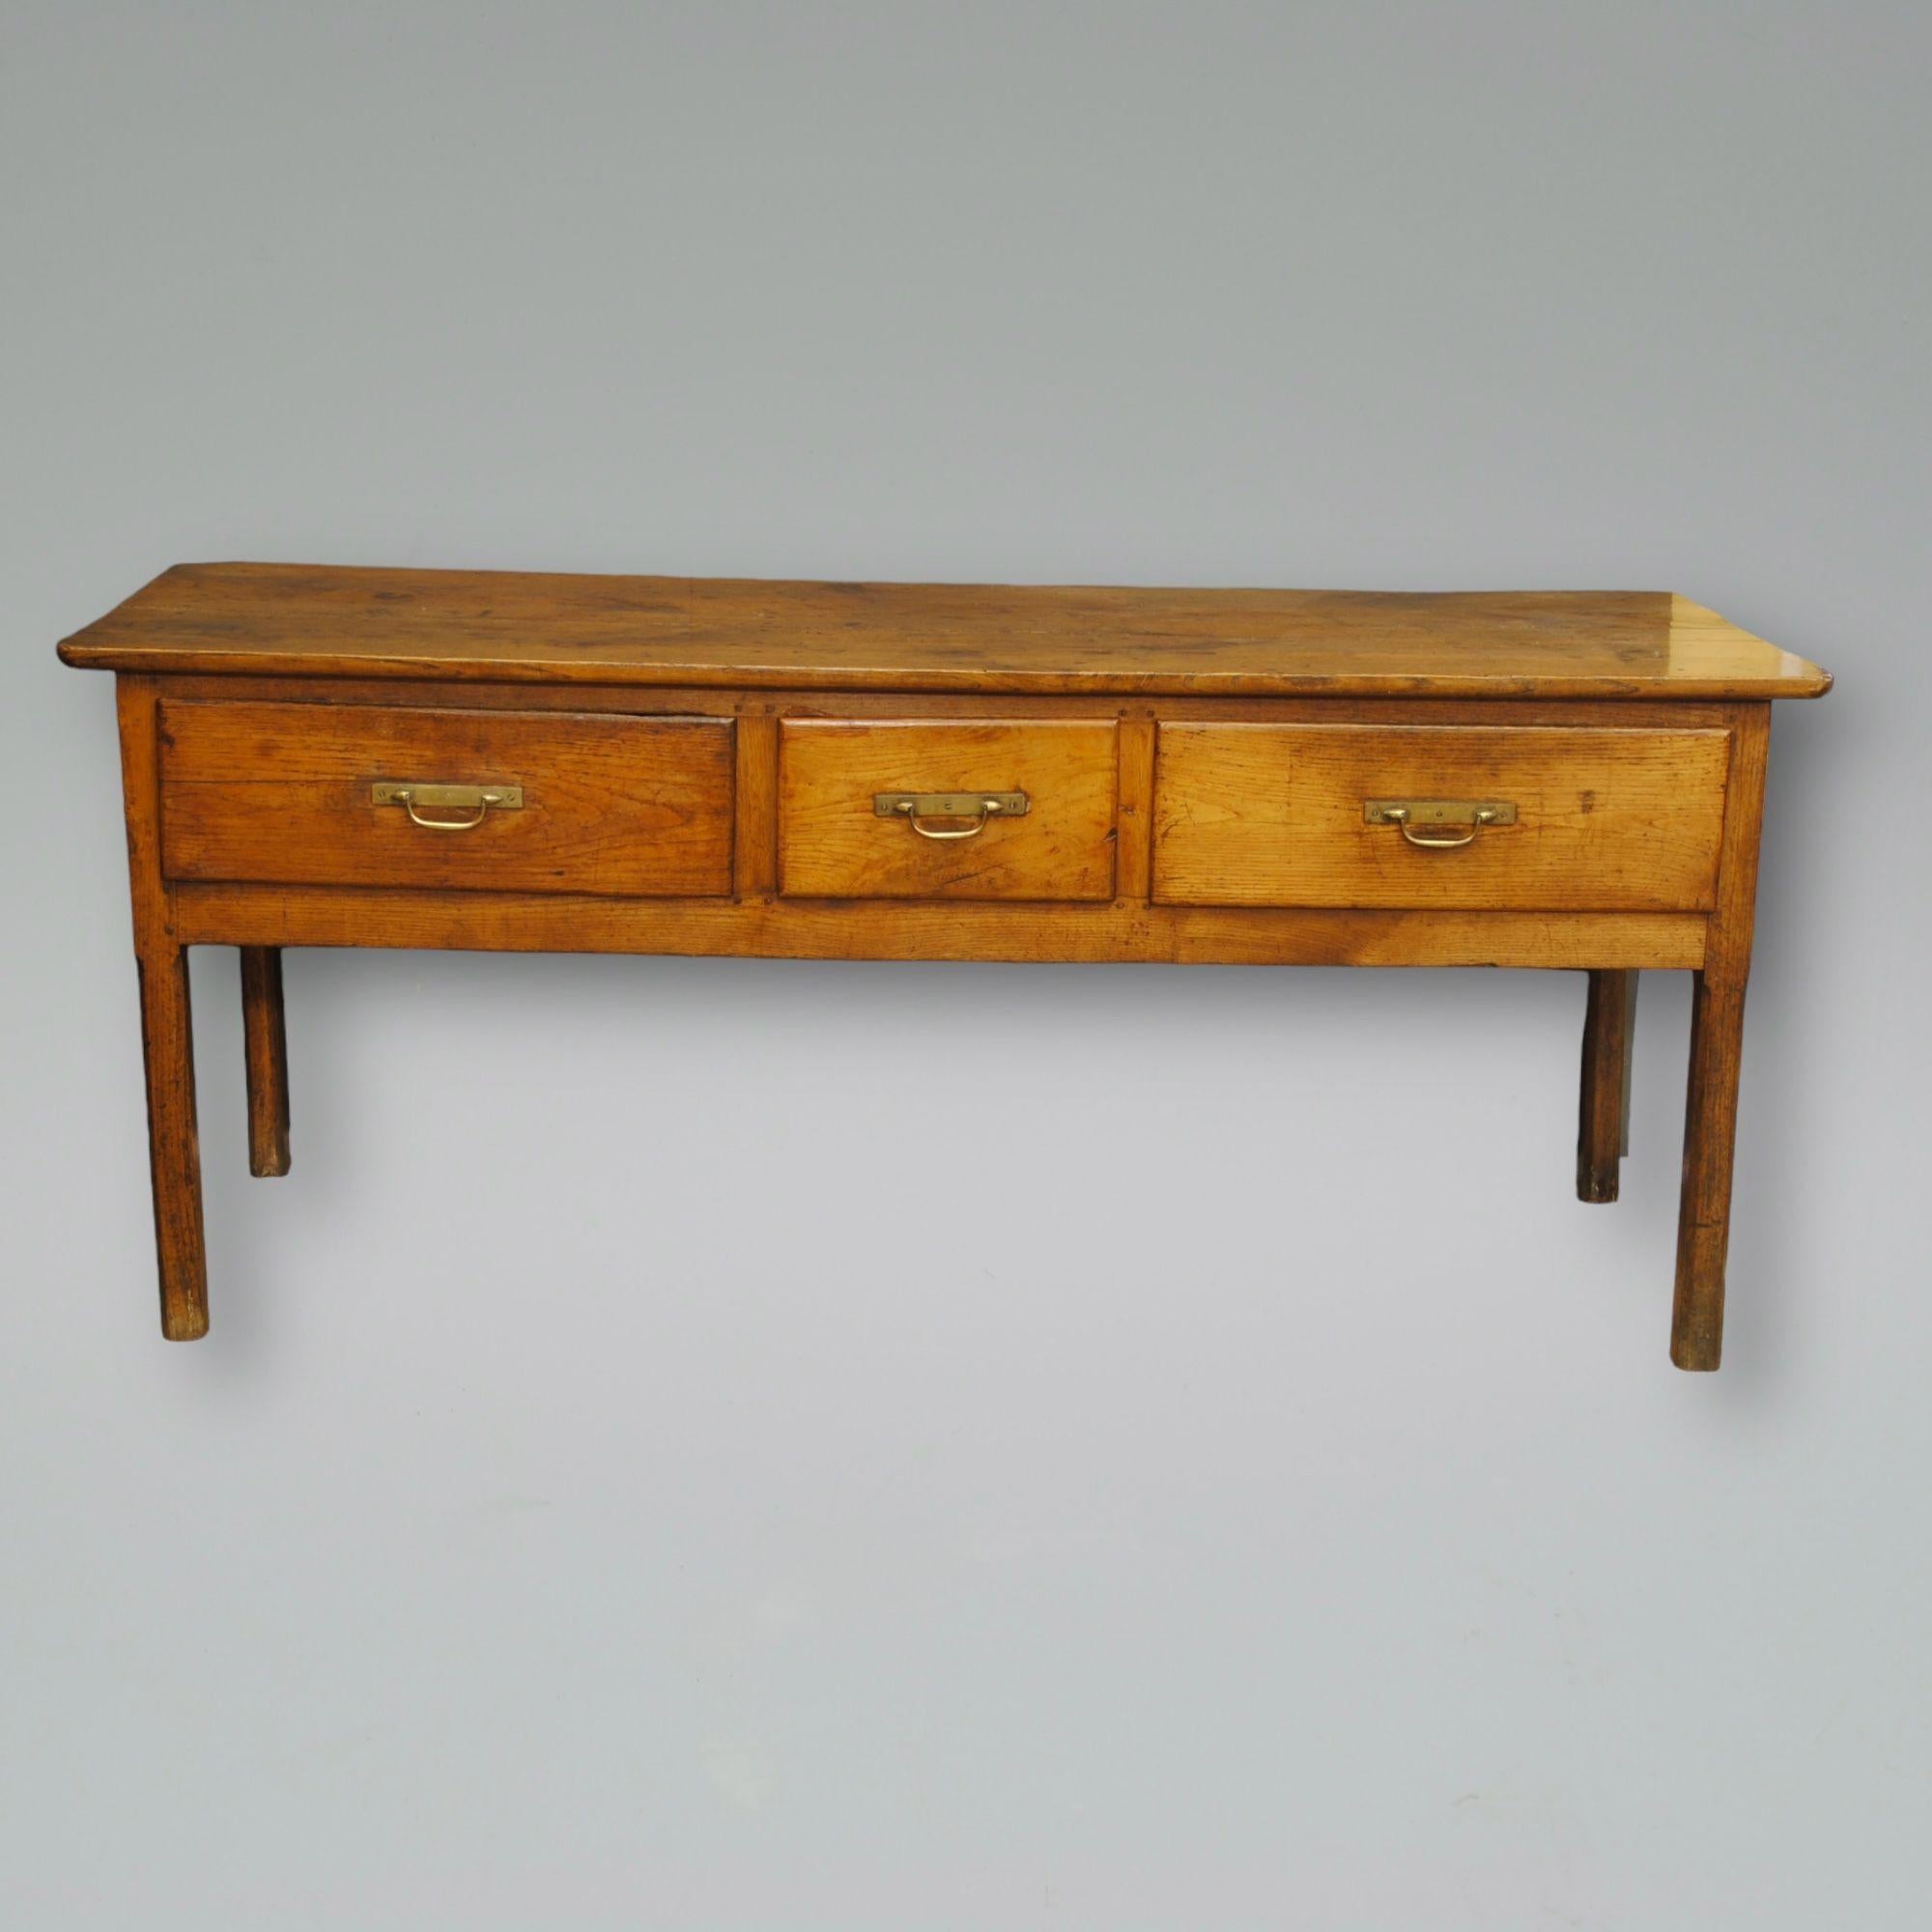 An unusual George III period elm country house dresser, it is finished on the back so would make an island in a kitchen
Lovely colour and patina.
Circa 1780